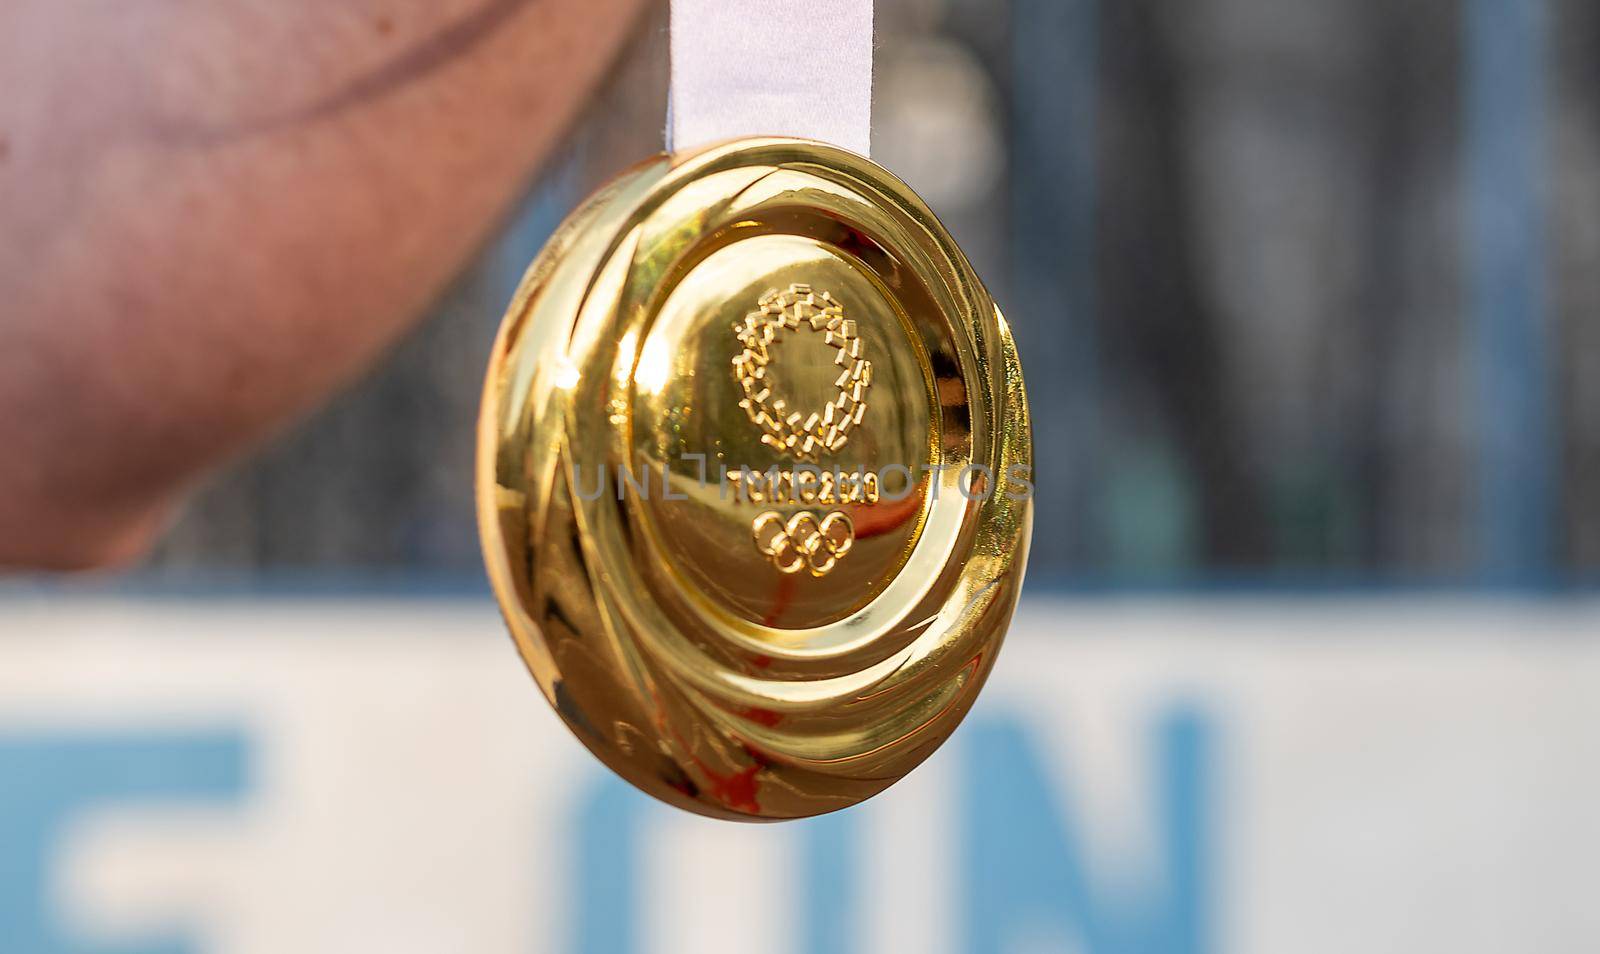 April 17, 2021 Tokyo, Japan. The gold medal of the XXXII Summer Olympic Games in Tokyo in the hand of an athlete.